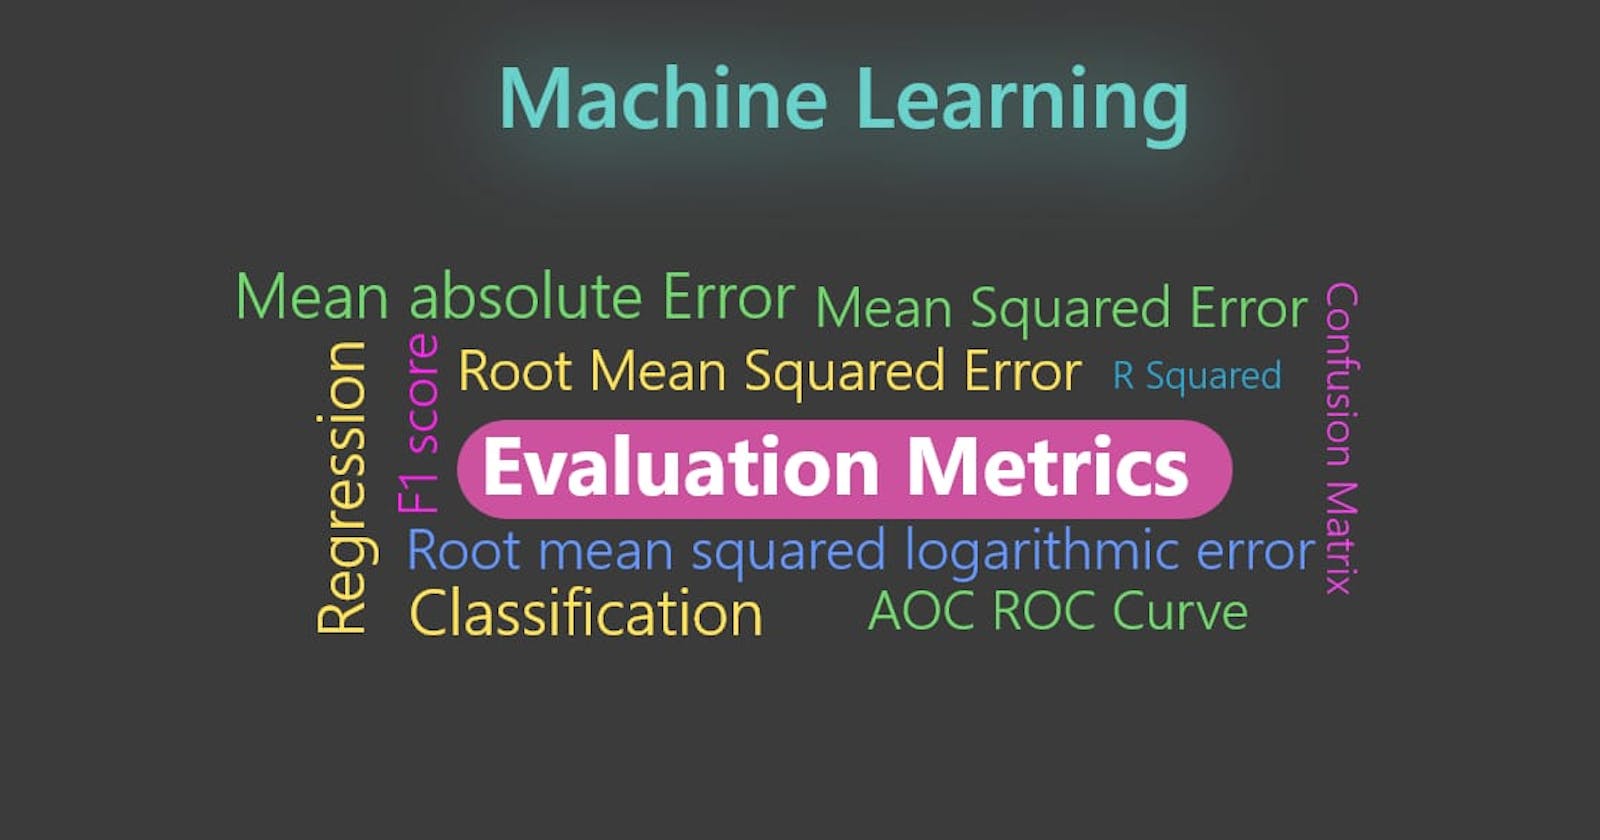 Machine Learning  metrics for classification and regression tasks.